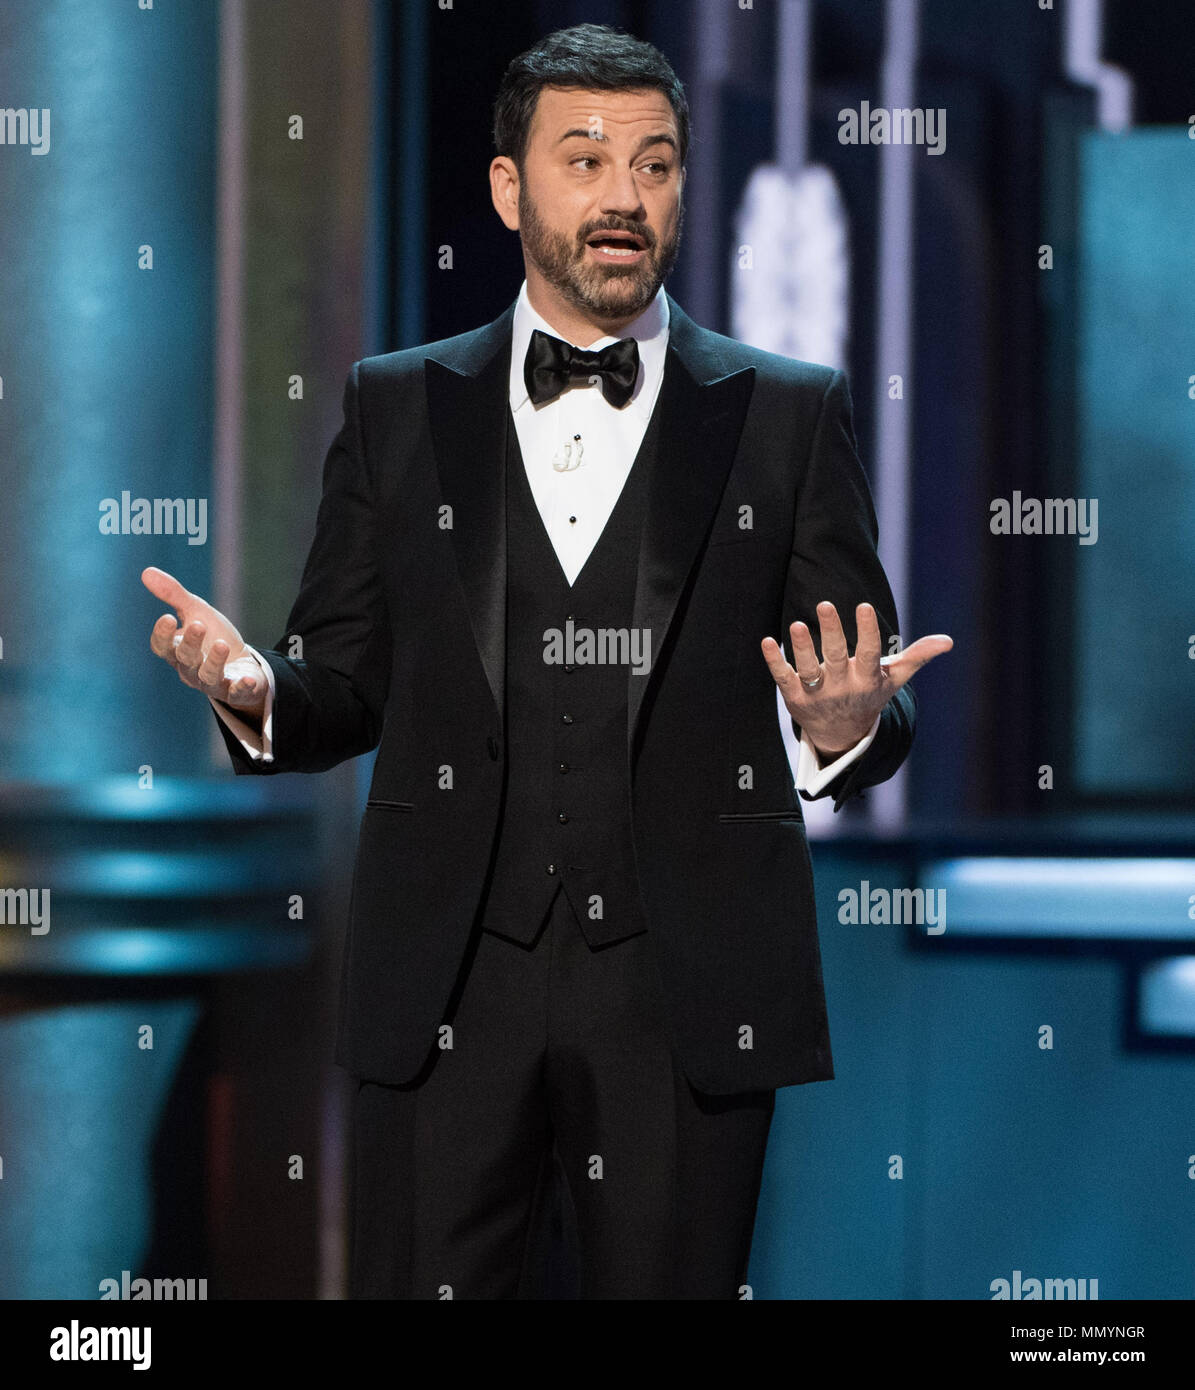 HOLLYWOOD, CA - FEBRUARY 26: Jimmy Kimmel performs onstage during the 89th Annual Academy Awards at Hollywood & Highland Center on February 26, 2017 in Hollywood, California  People:  Jimmy Kimmel Stock Photo